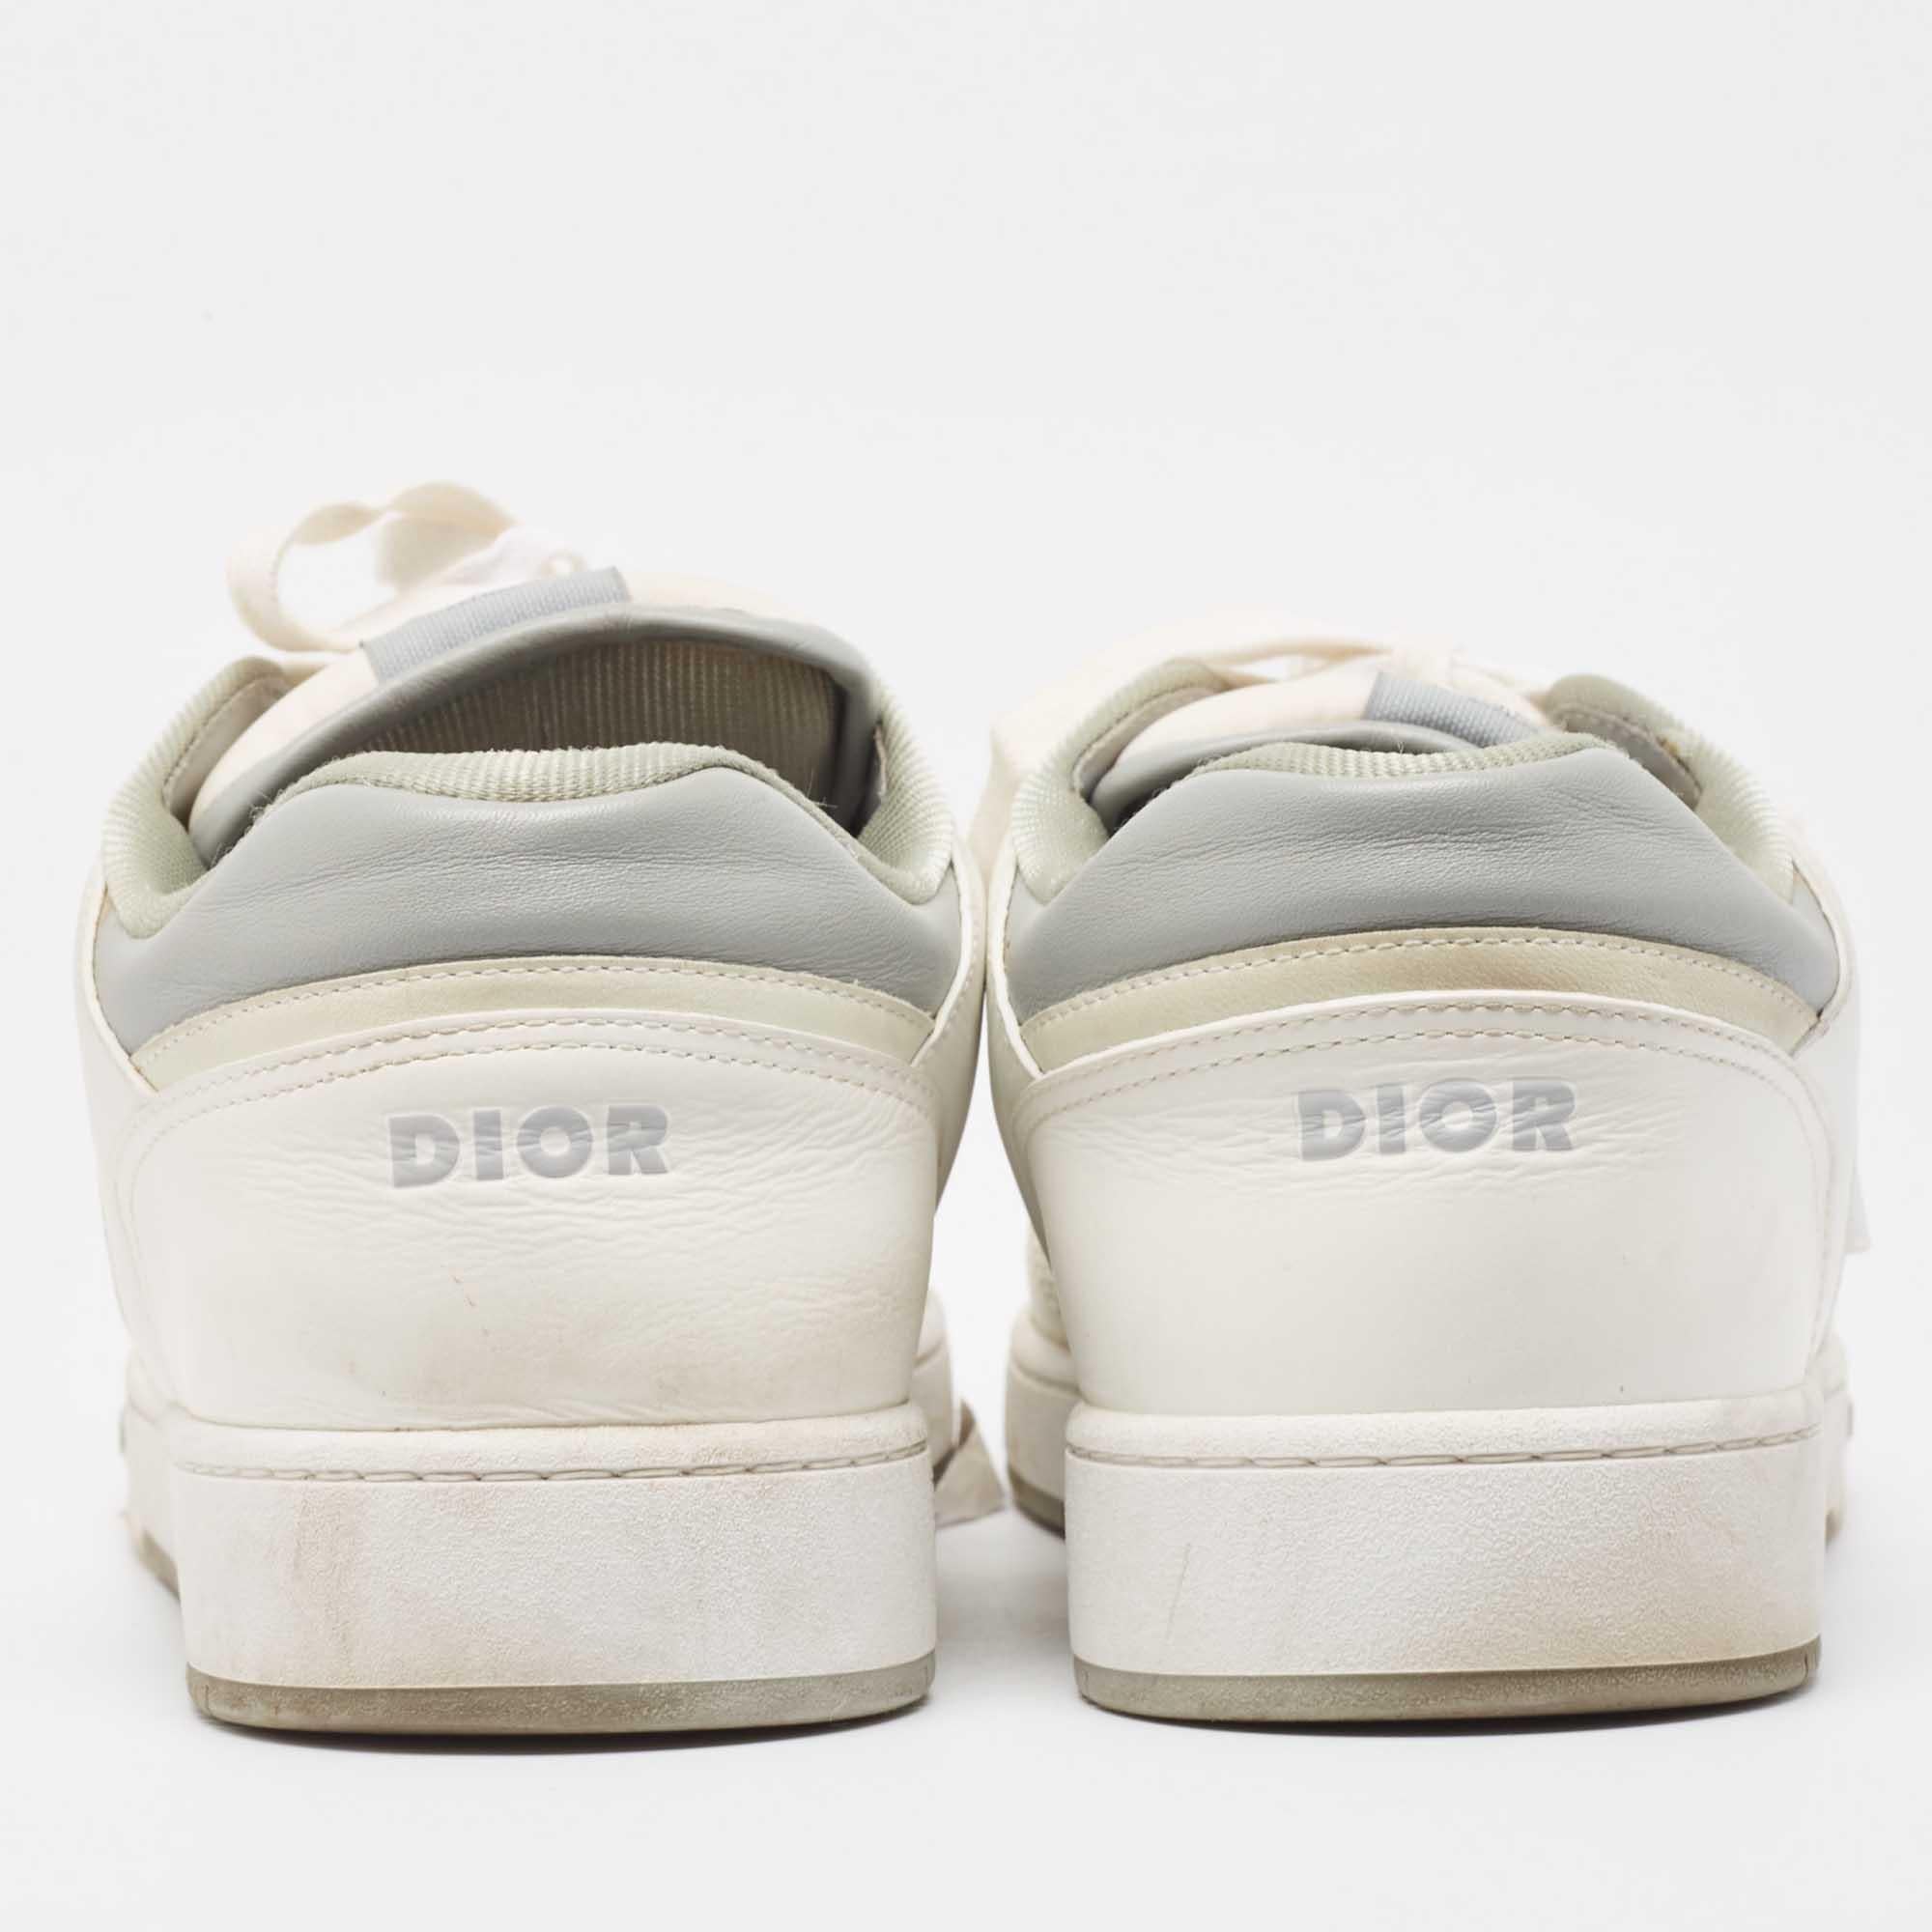 Men's Dior White/Grey Leather B27 Low Top Sneakers Size 46 For Sale